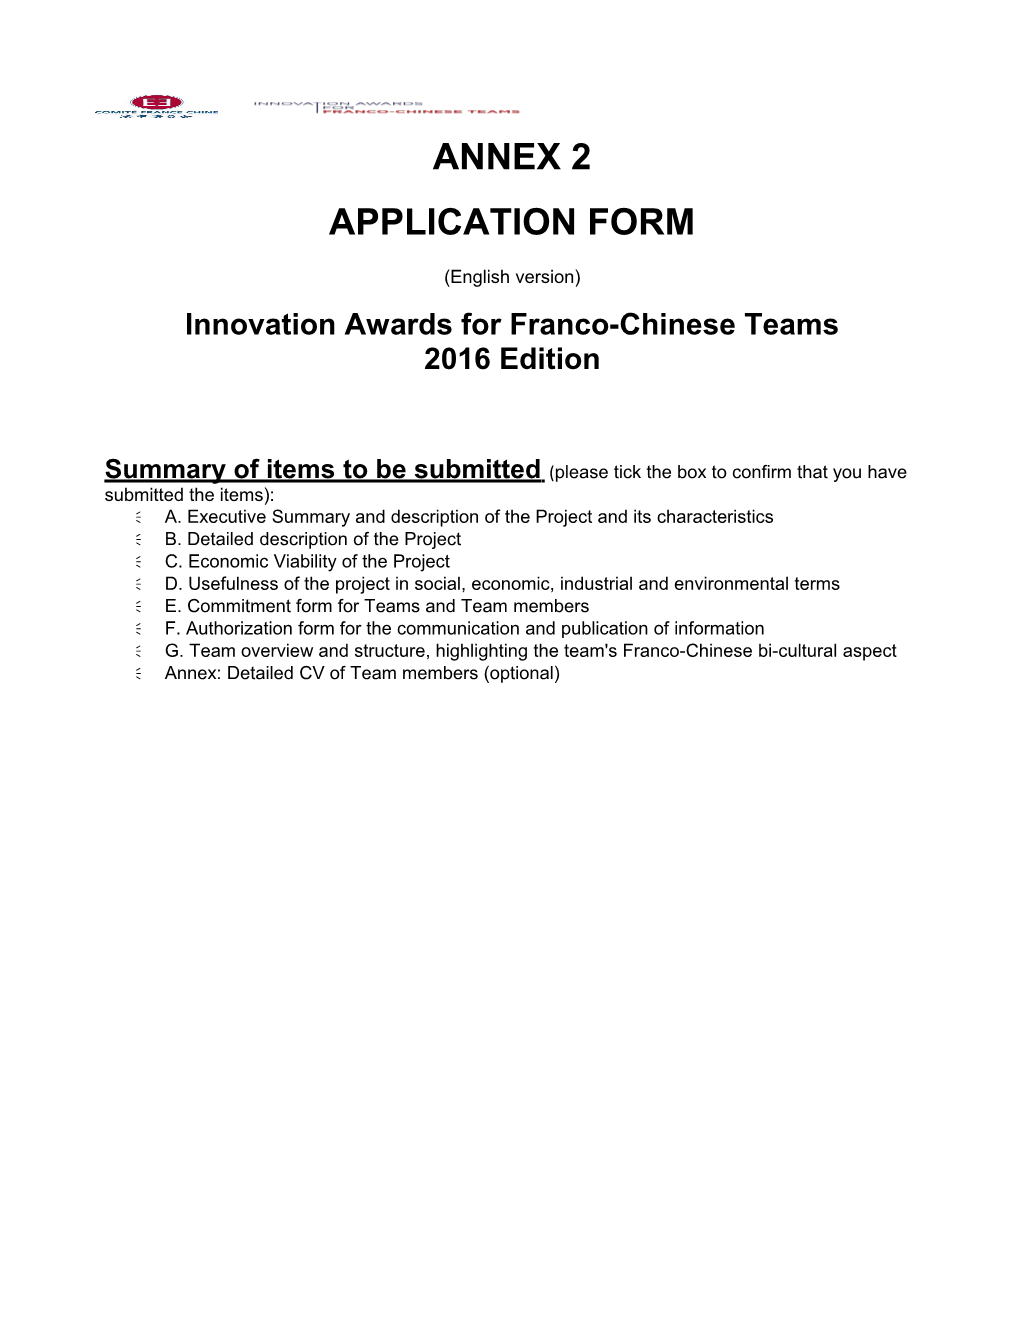 Innovation Awards for Franco-Chinese Teams 2016 Edition